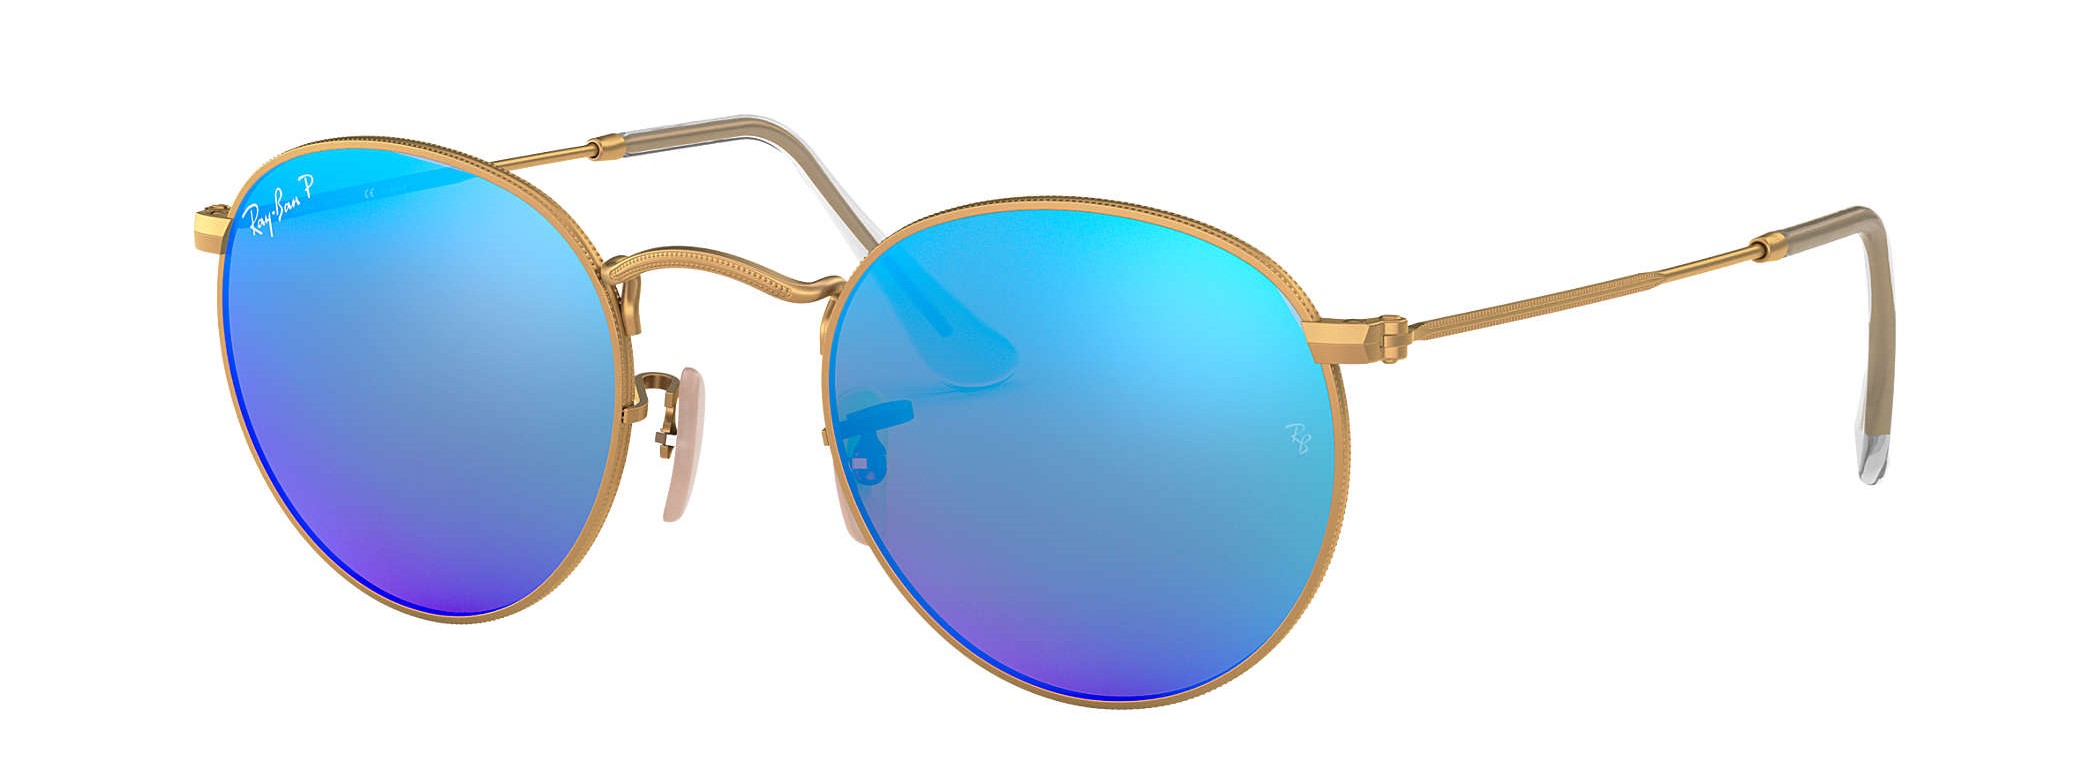 ray-ban round sunglasses rb3447 in matte gold with blue mirror lenses